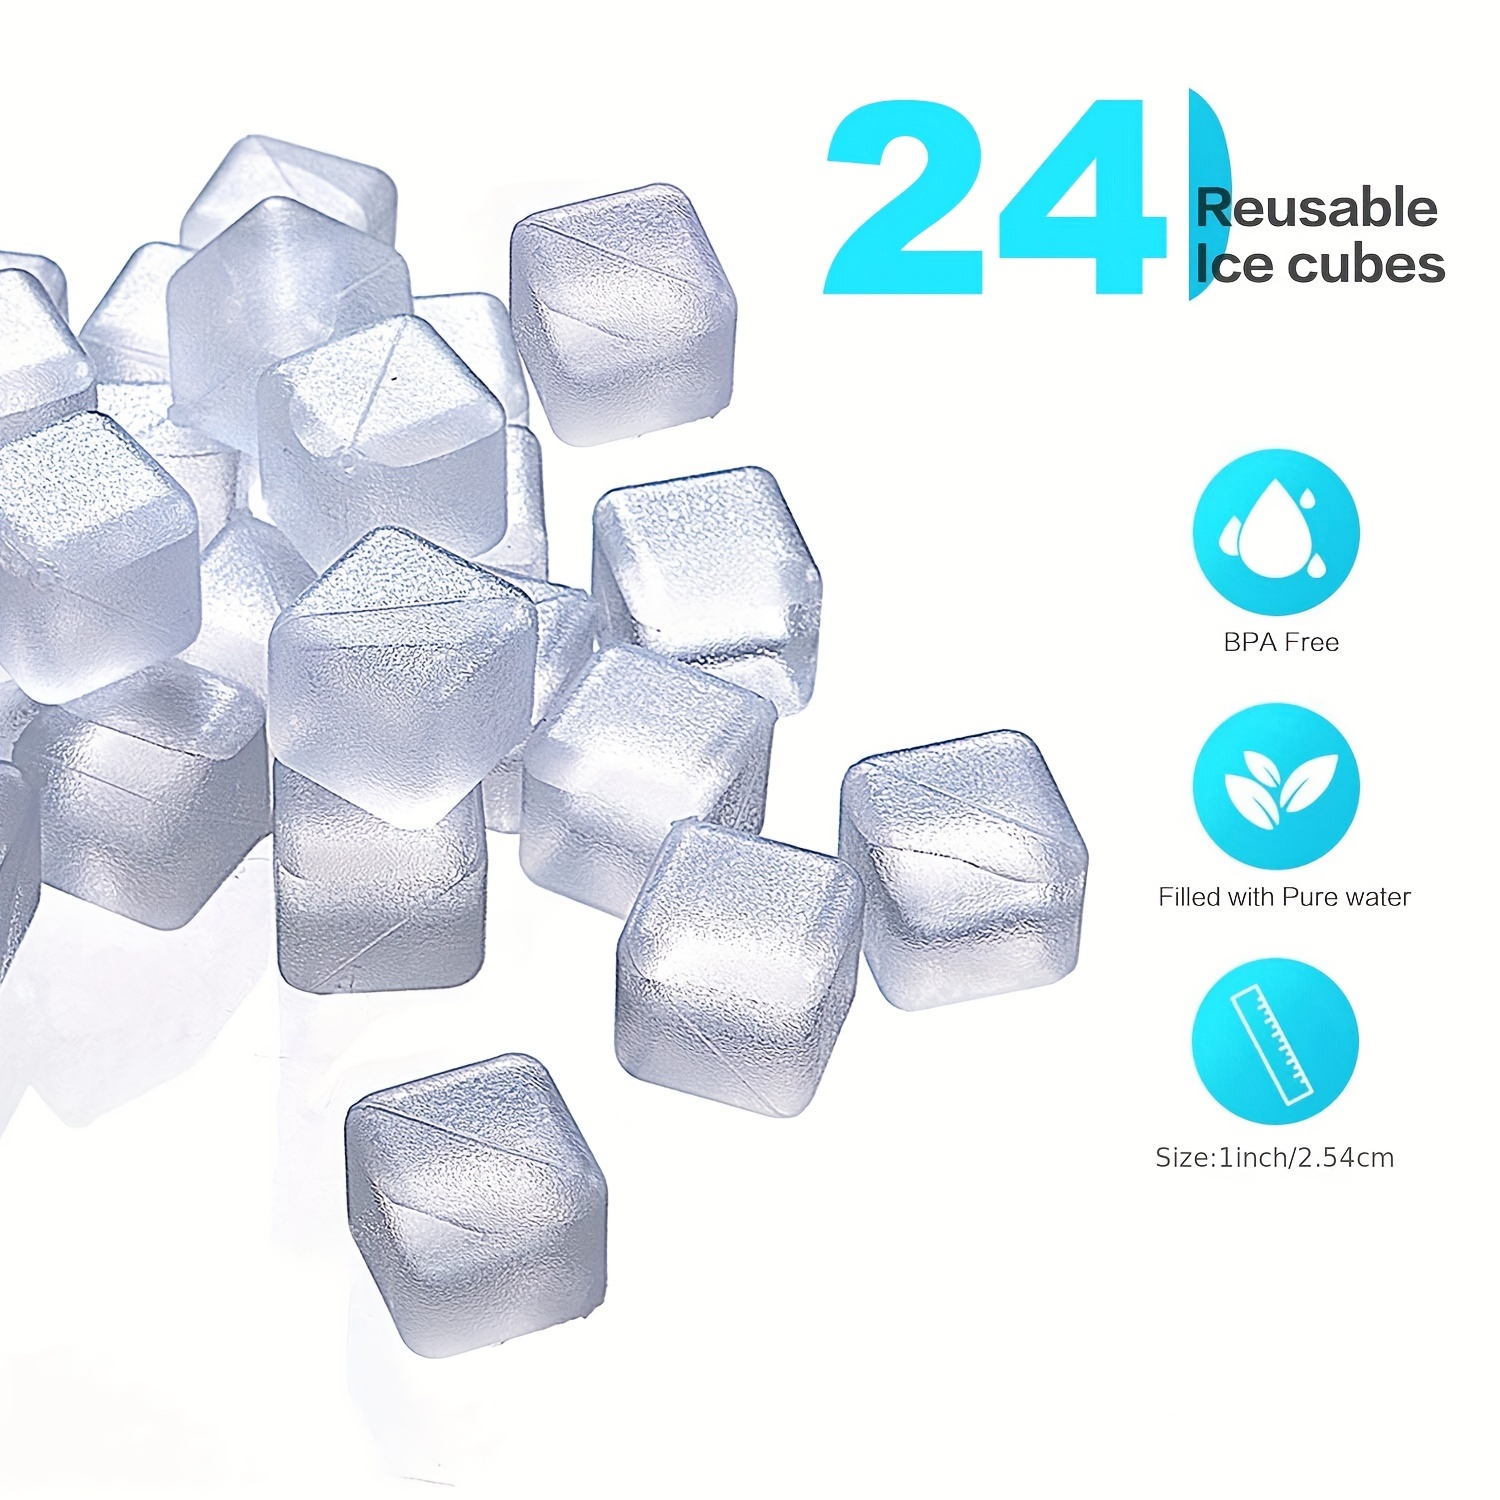 Reusable Ice Cubes - Square Colored Plastic Ice Cubes for Drinks, Cocktails, Beer, Whiskey, Parties, Non-diluting Ice Cubes, 40pcs